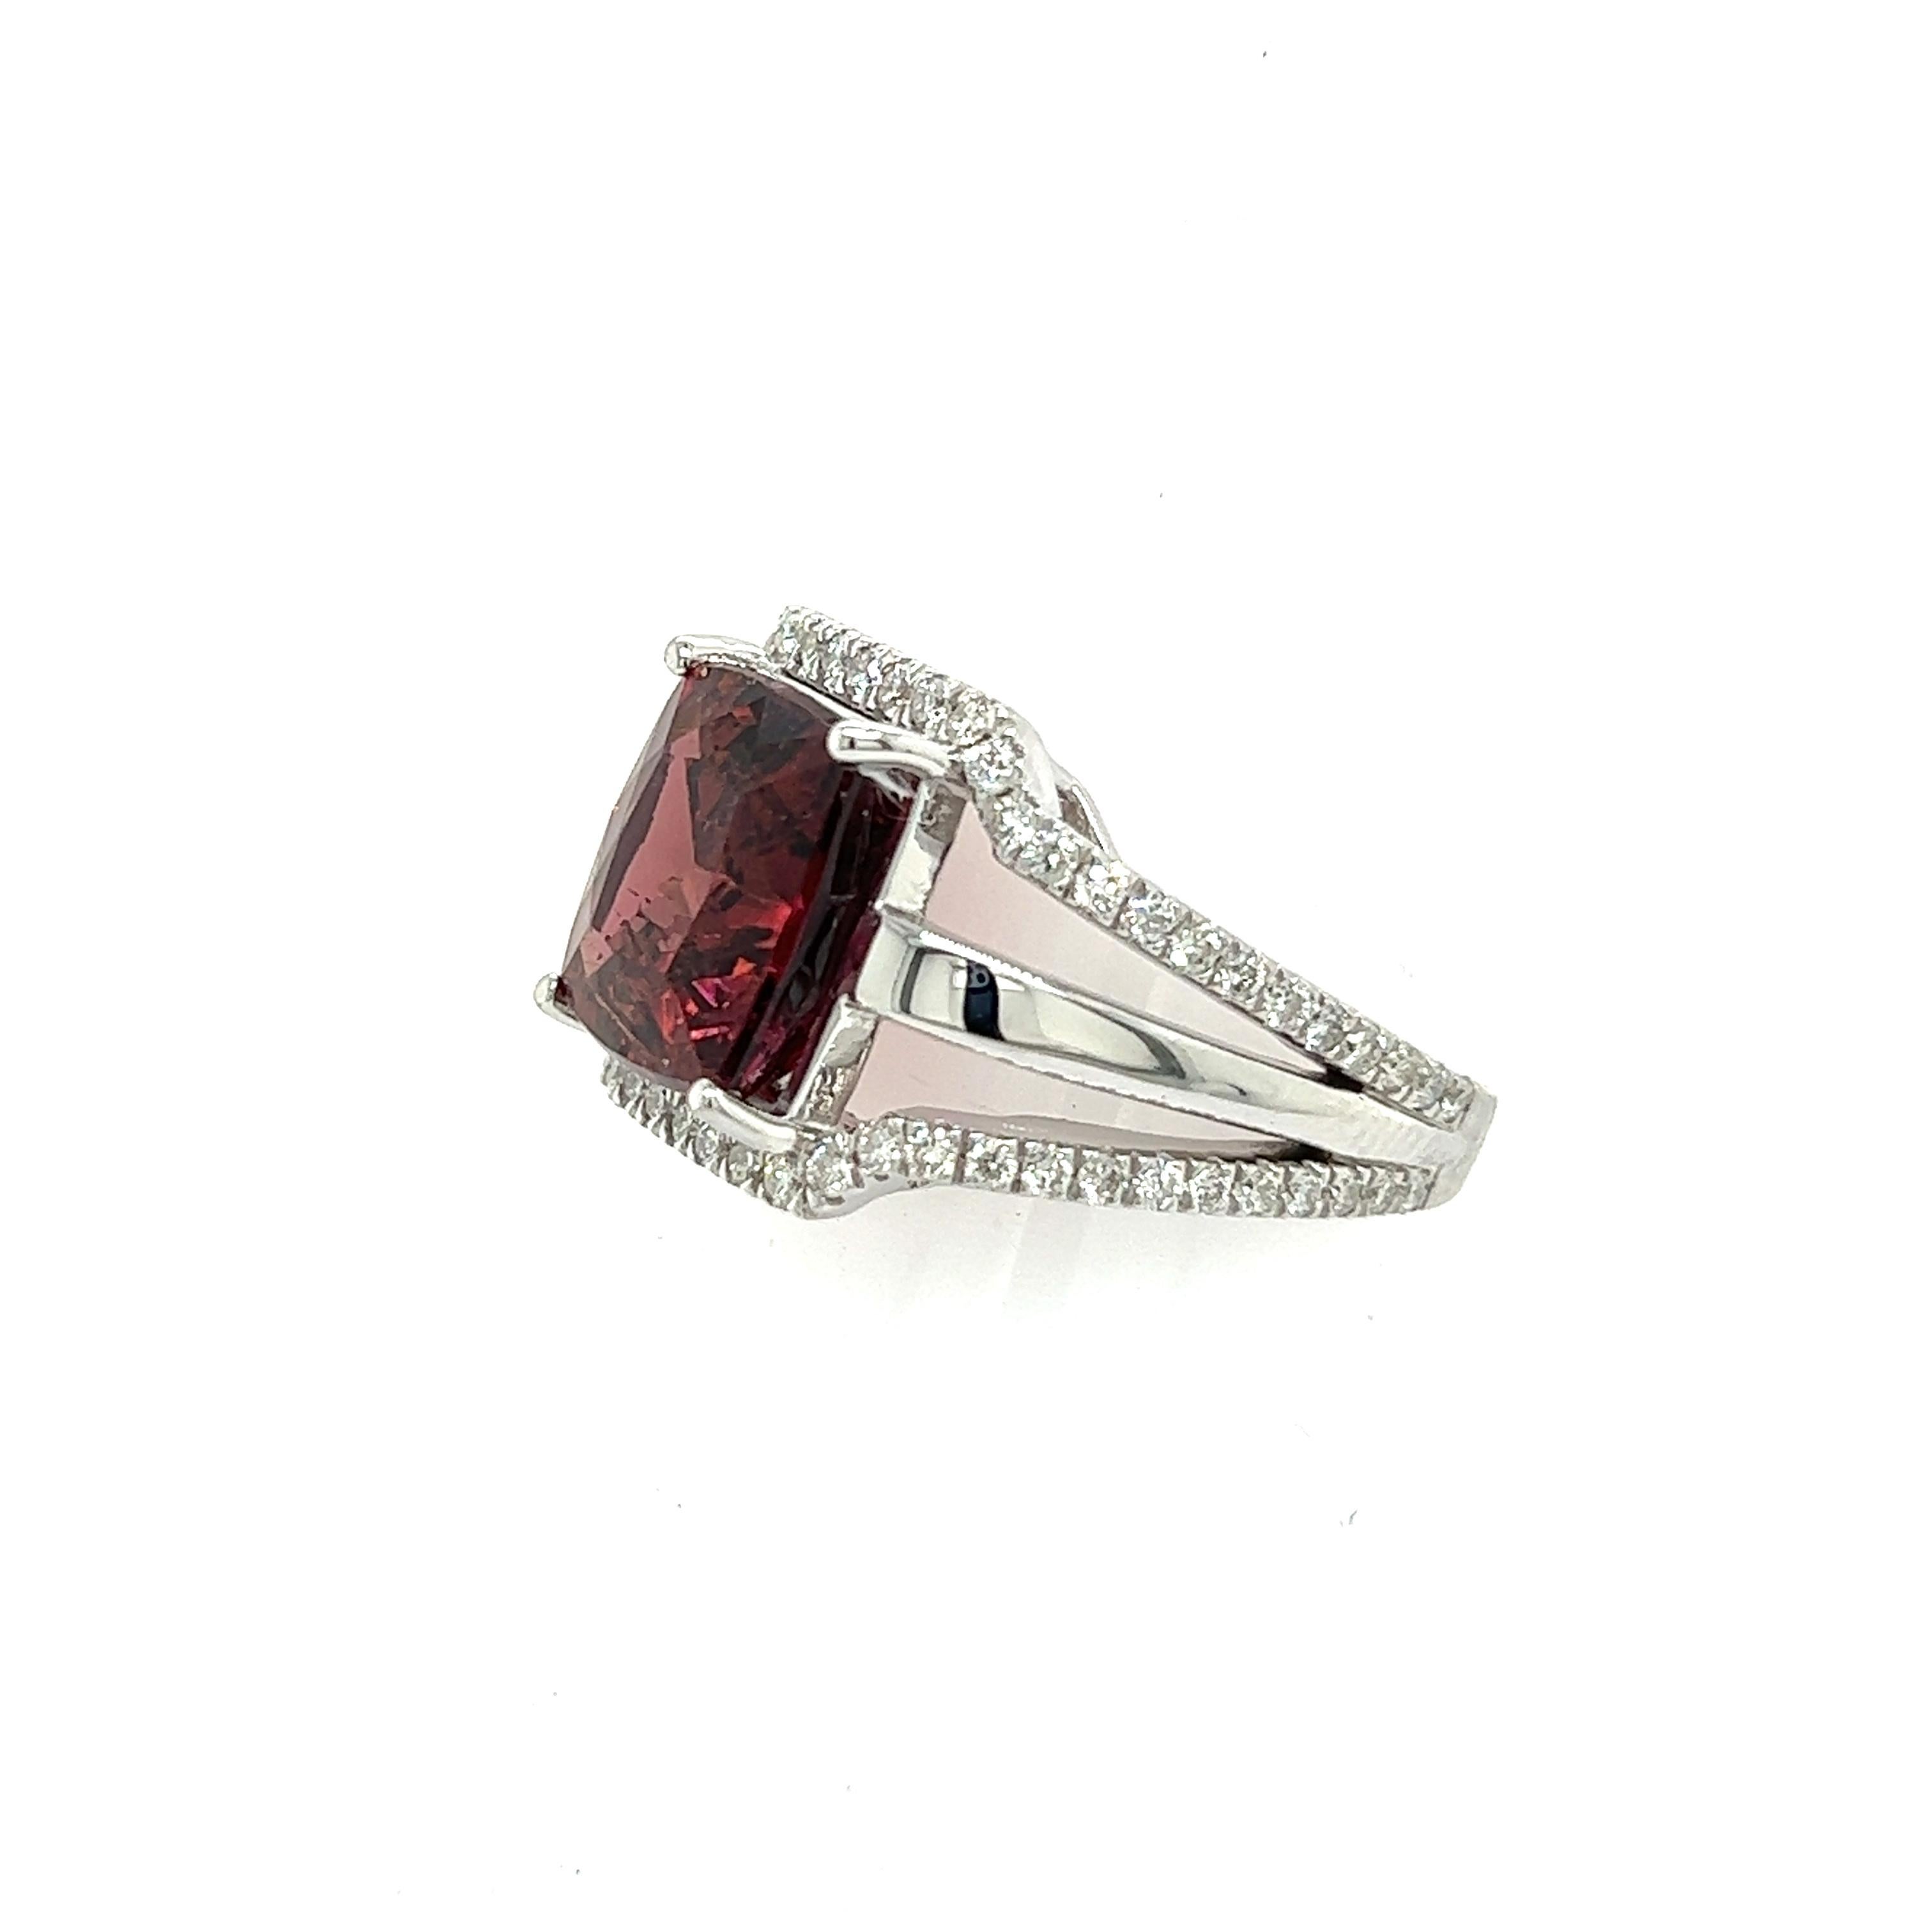 Natural Tourmaline Diamond Ring 6.5 14k White Gold 5.89 TCW Certified For Sale 3